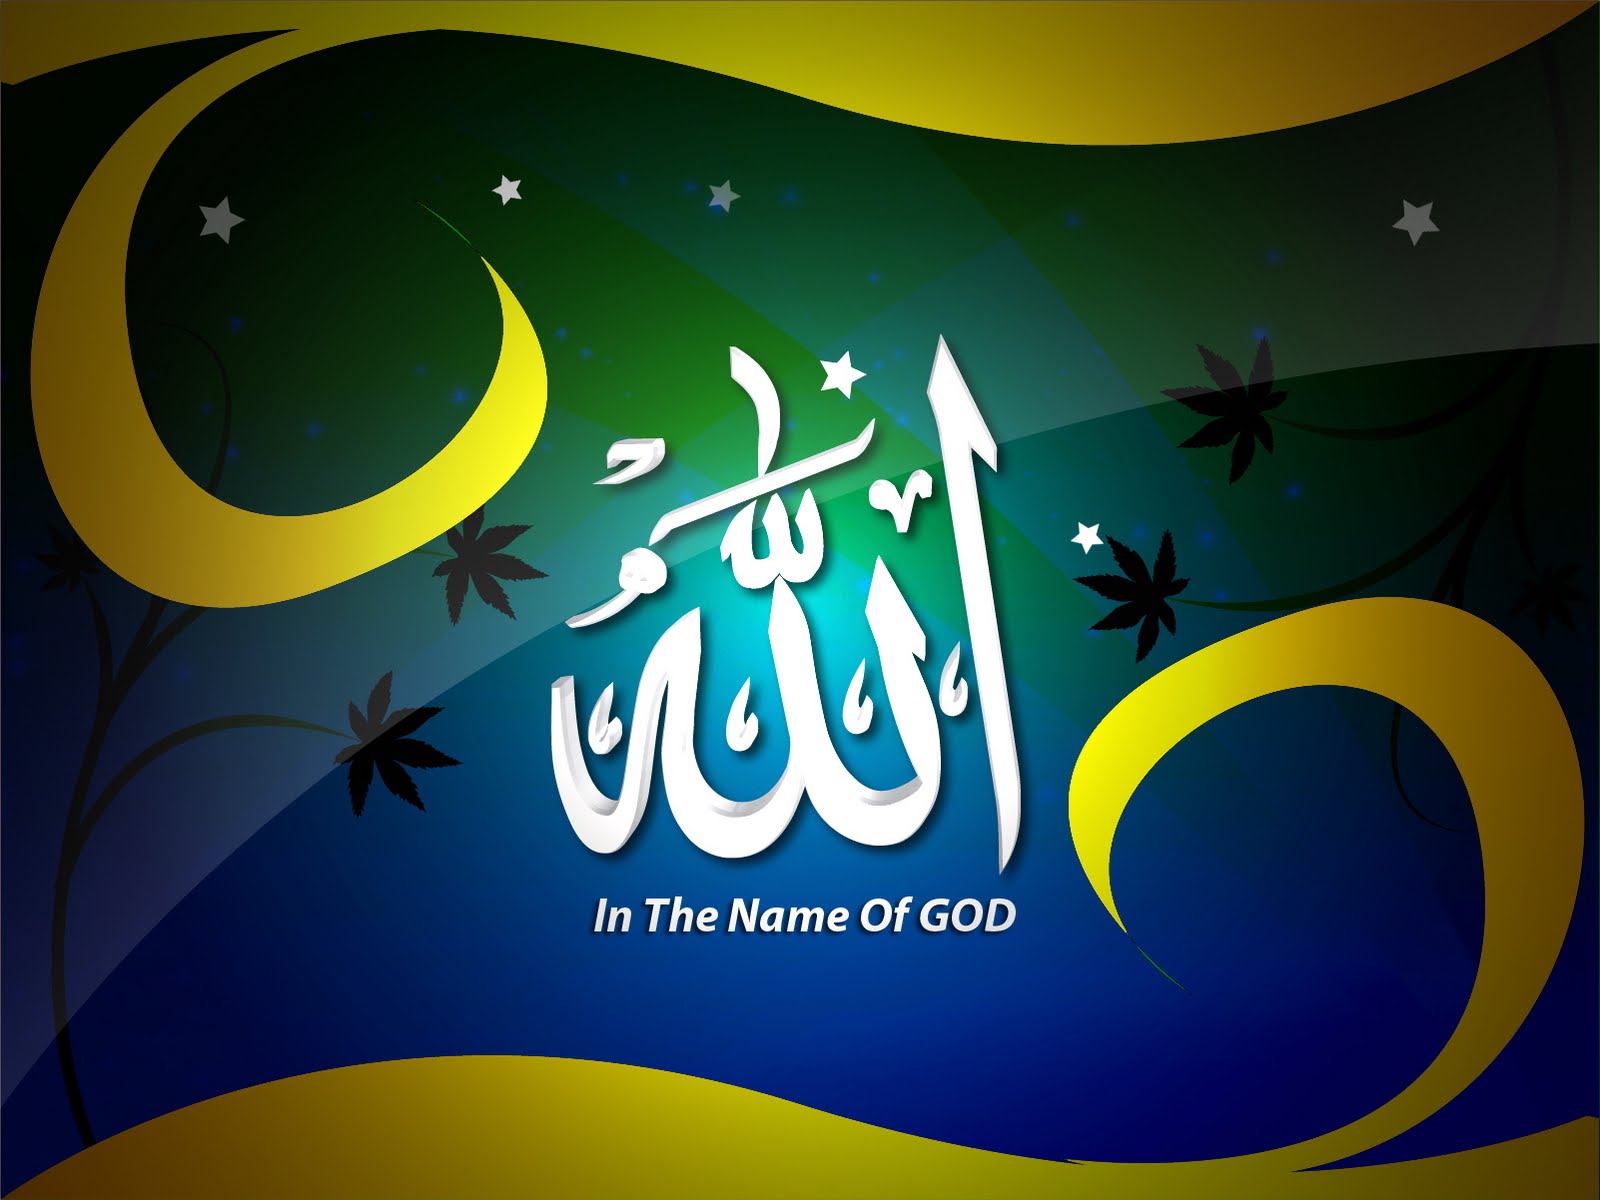 This Is The Allah Background Image You Can Use Powerpoint Templates